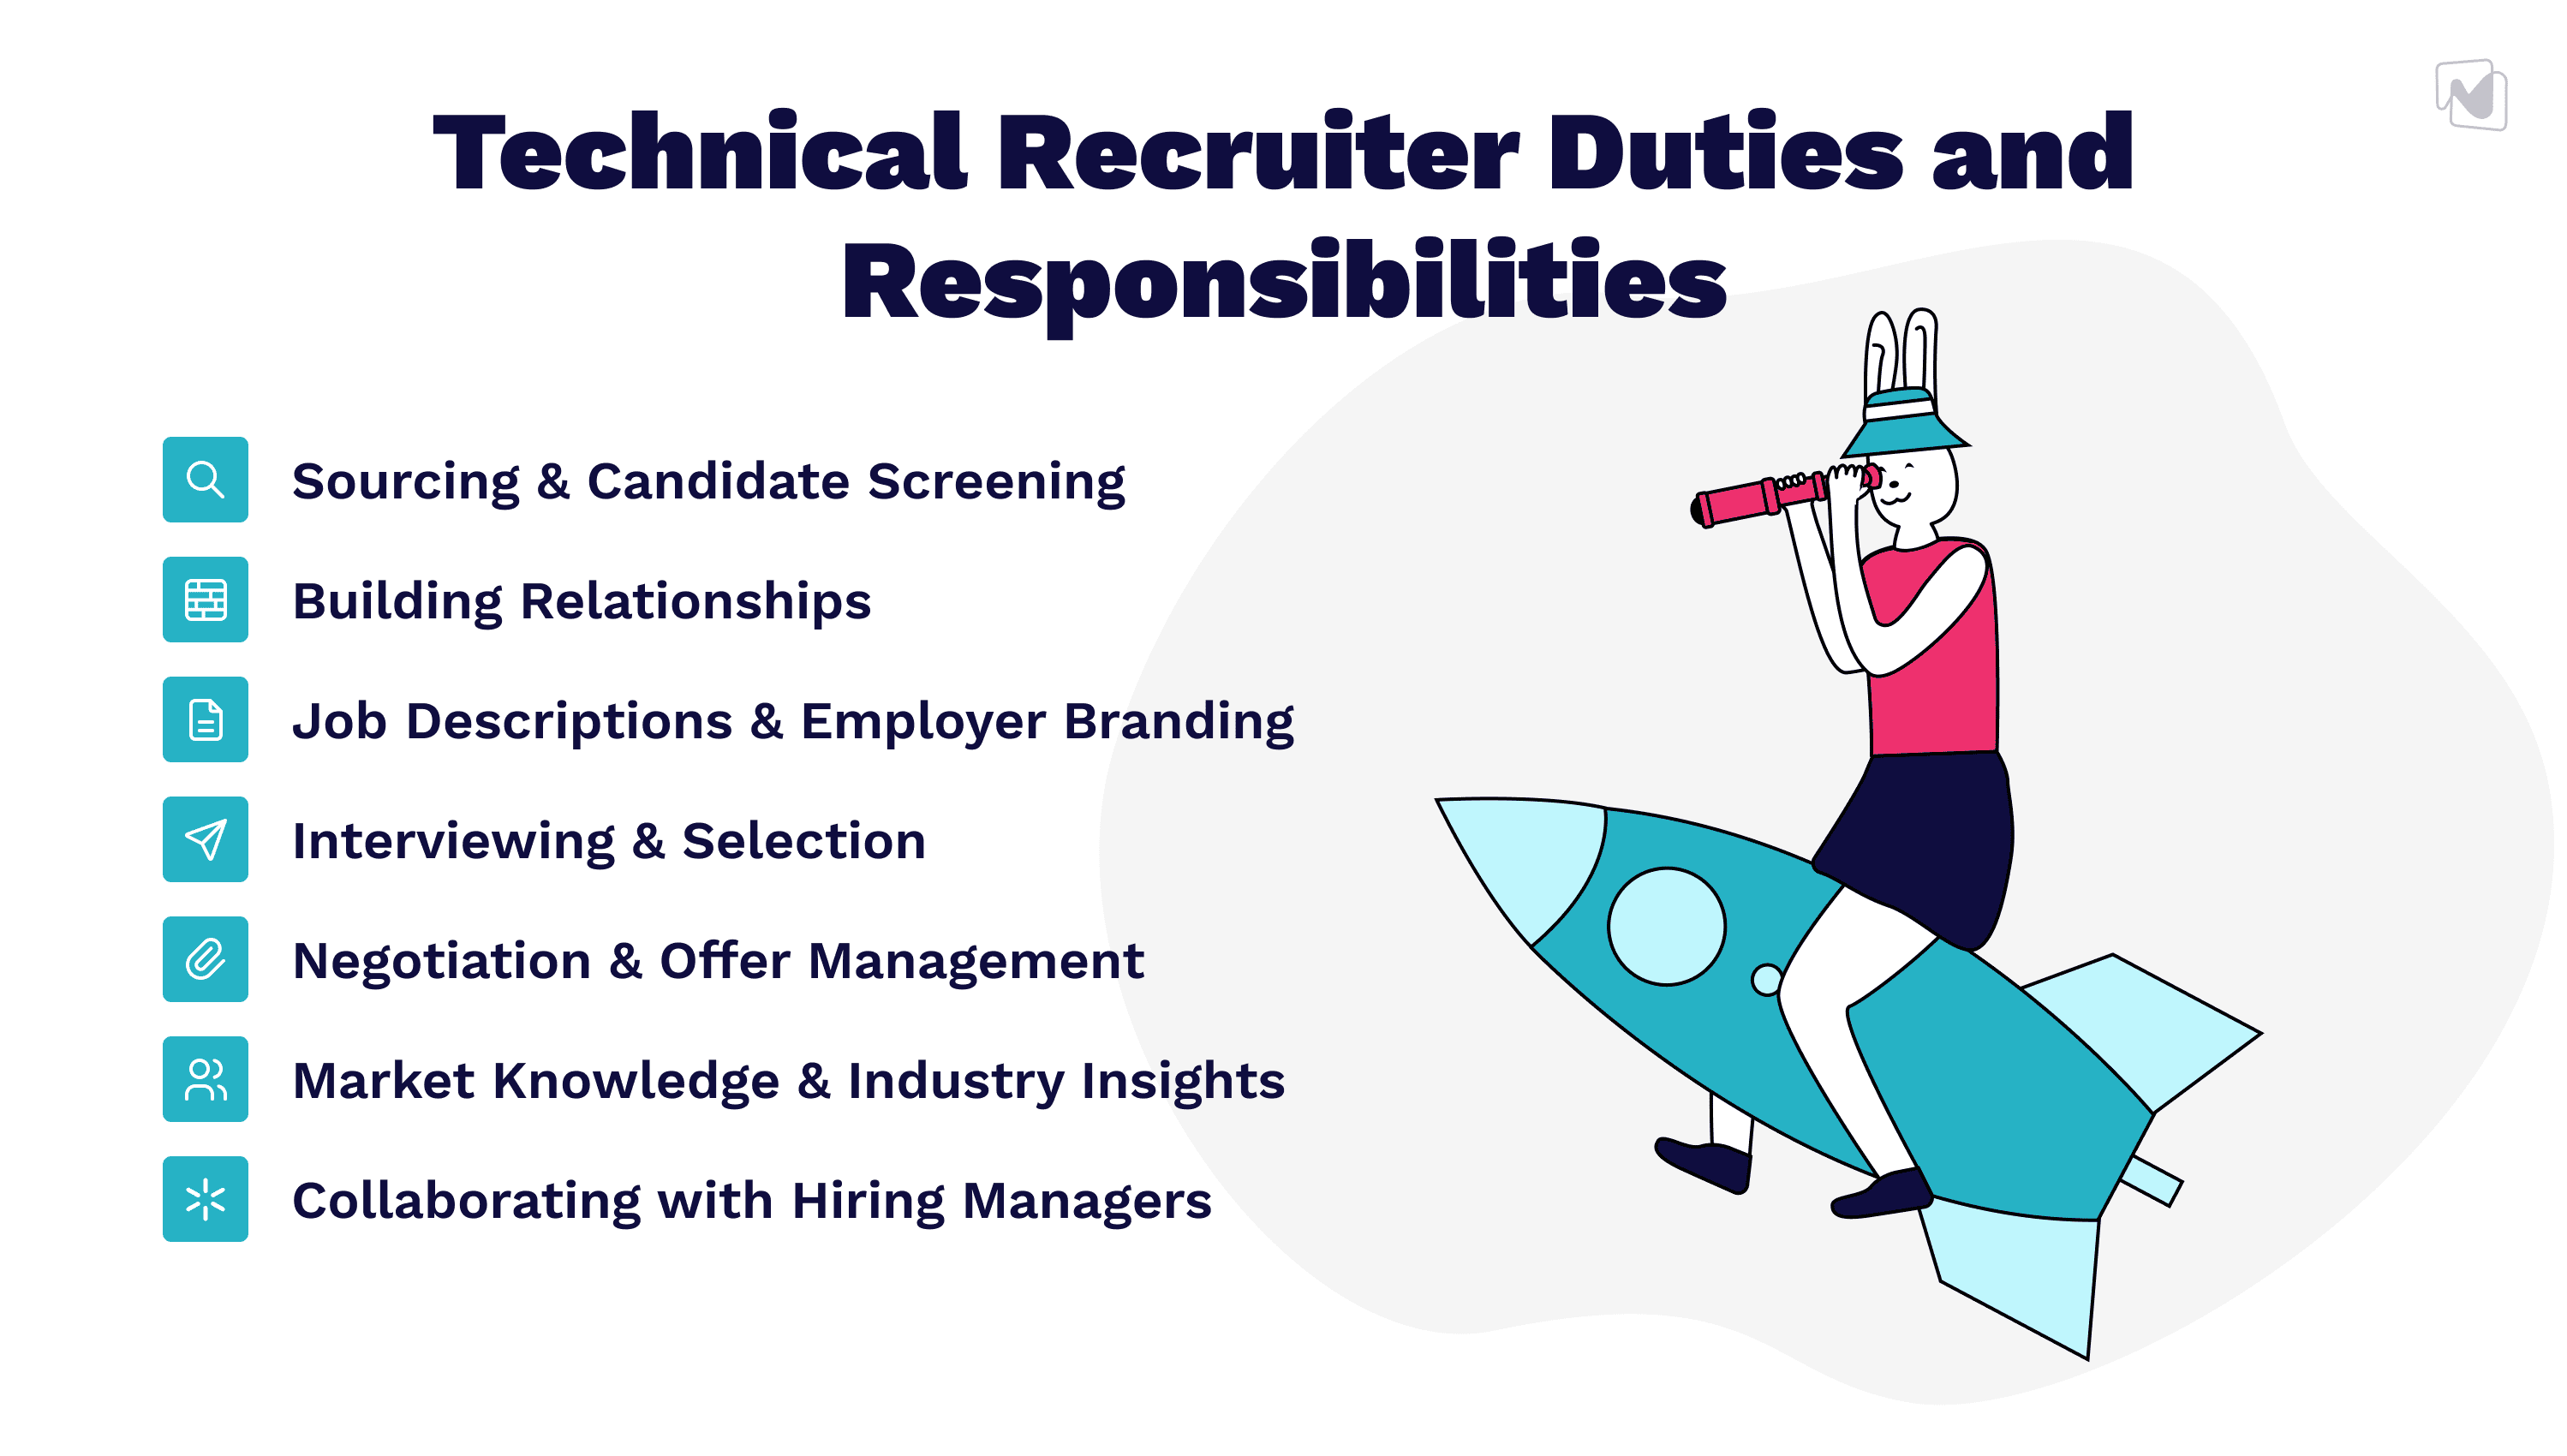 What You Need to Know About Third-Party Tech Recruiting